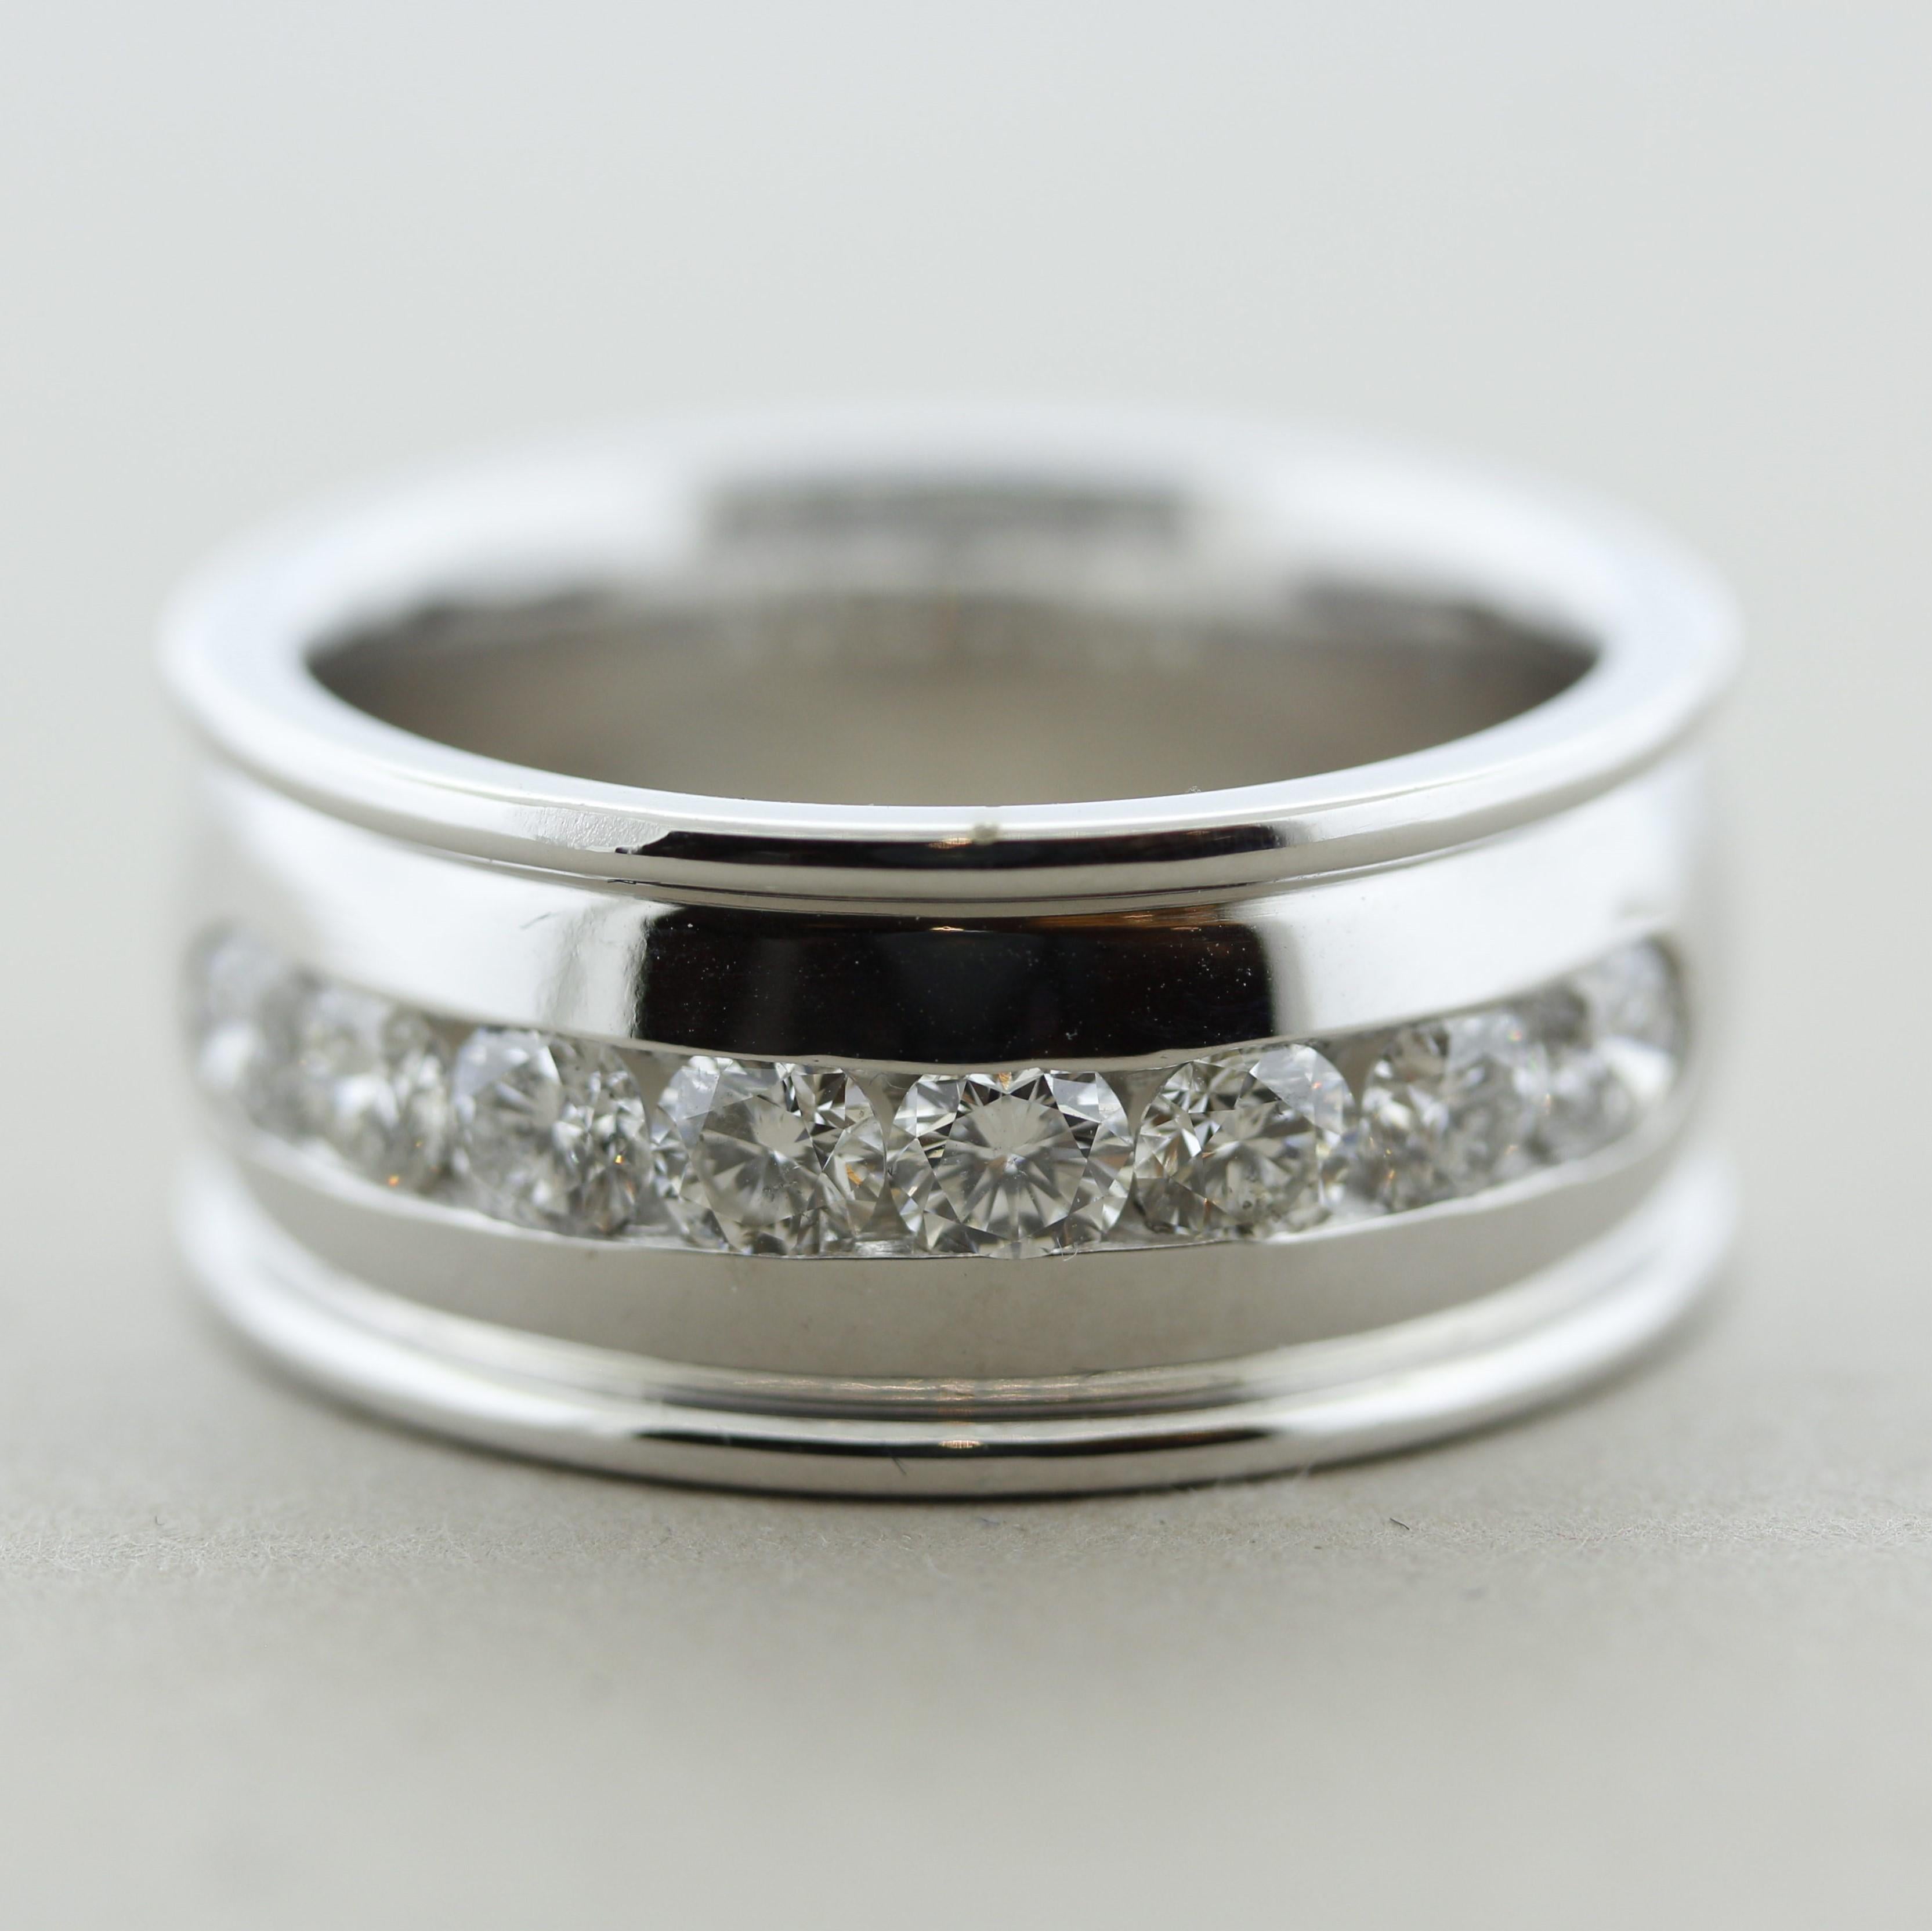 A large white gold band featuring 8 round brilliant-cut diamonds weighing a total of 1.40 carats. They are white bright and clean, channel set in the center of the ring. Made in 14k white gold and ready to be worn.

Ring Size 11.25